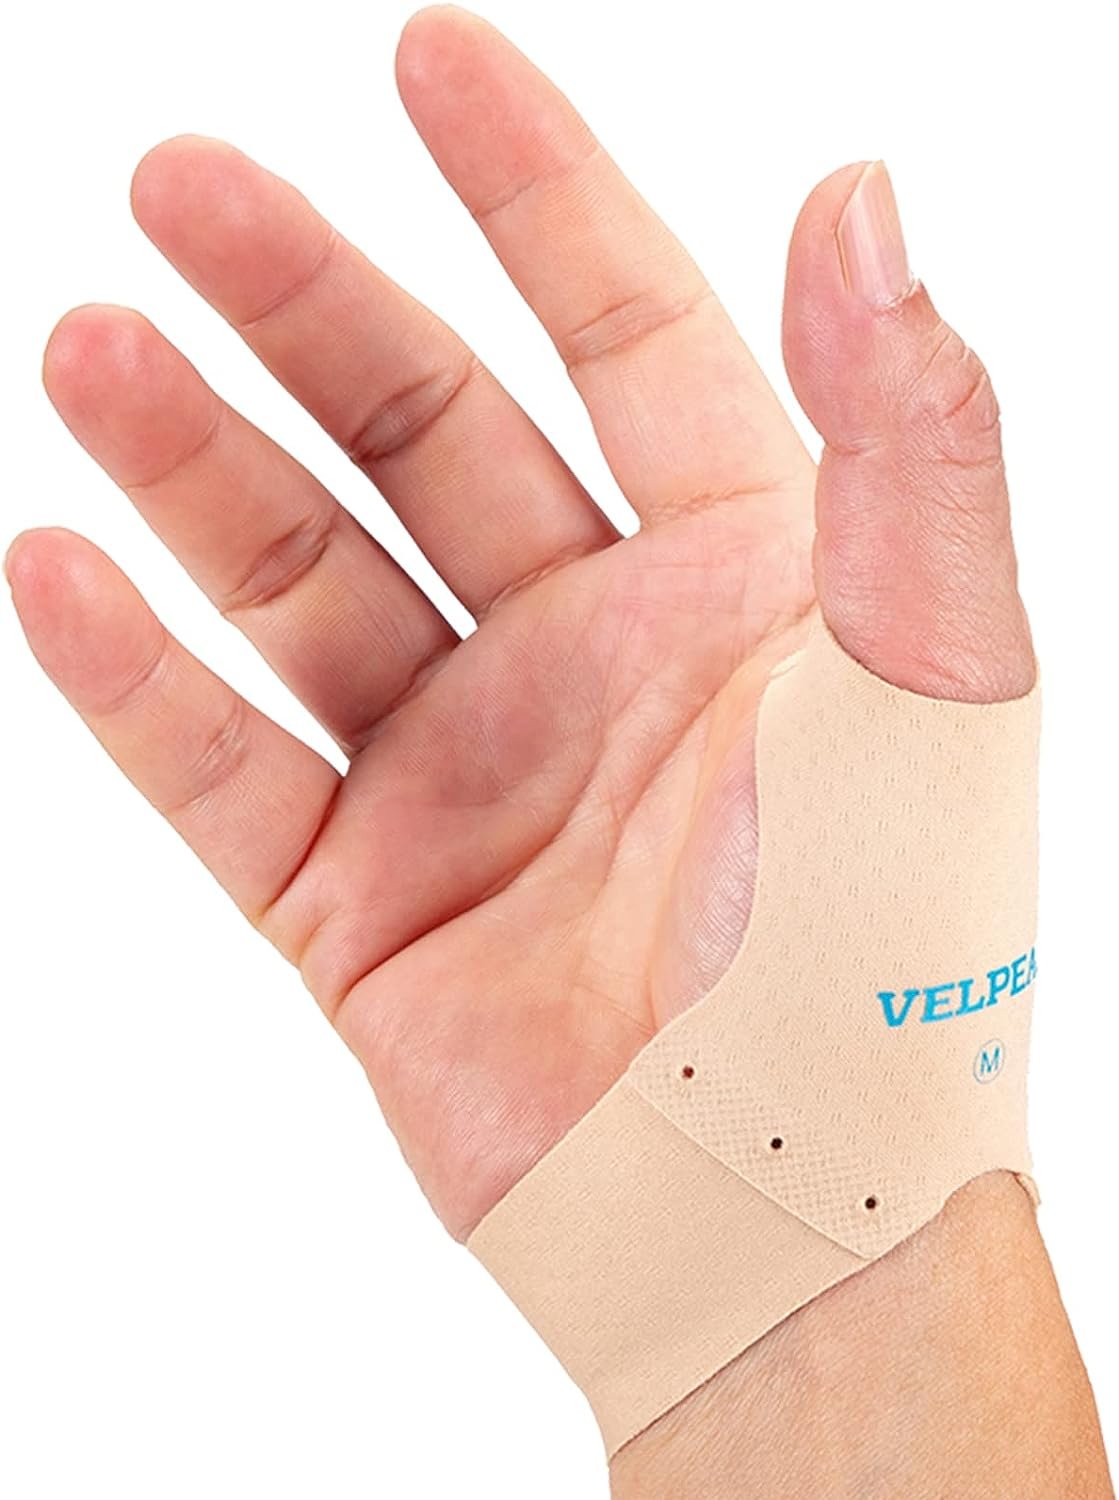 Velpeau Elastic Thumb Support Brace Layer (Pair) - Soft Thumb Compression Sleeve Protector for Relieving Pain, Arthritis, Joint Pain, Tendonitis, Sprains, Sports (Medium)